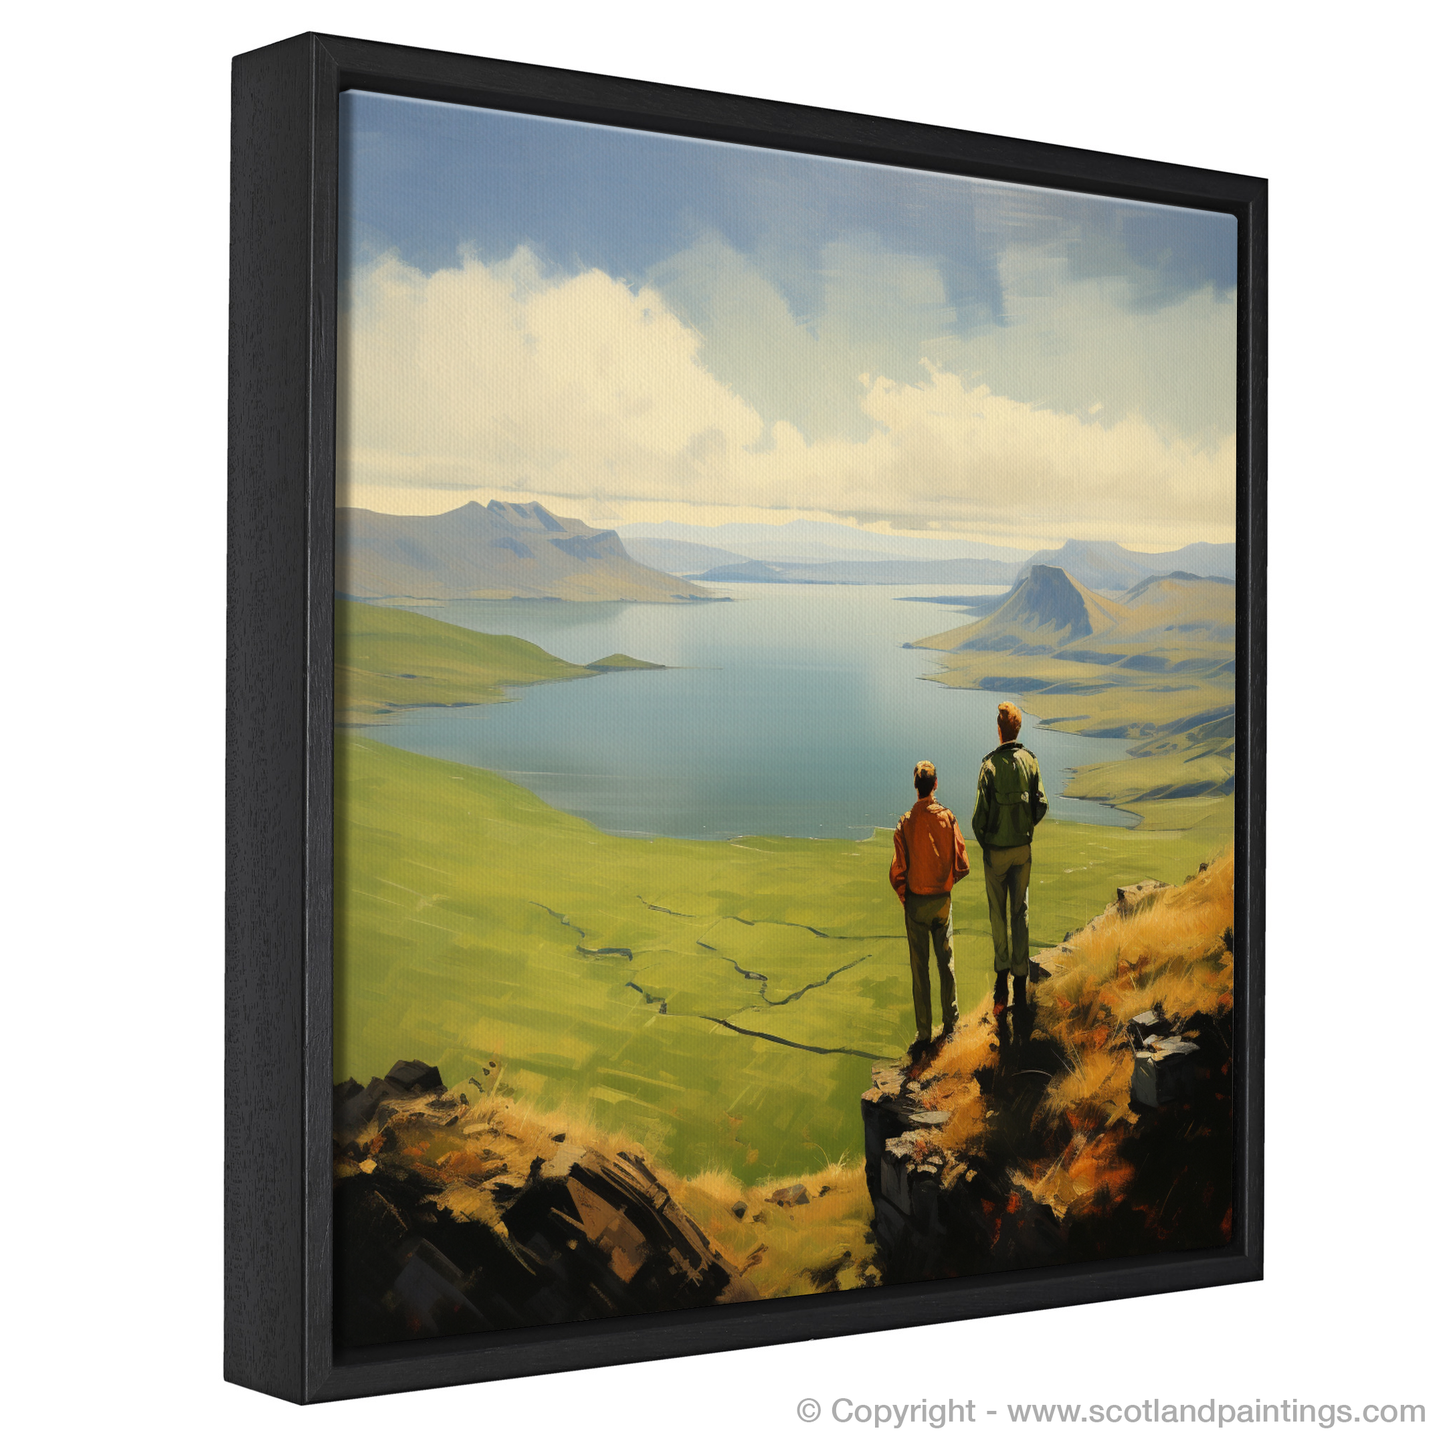 Painting and Art Print of Two hikers looking out on Loch Lomond entitled "Standing on the Edge of Serenity: Two Hikers at Loch Lomond".